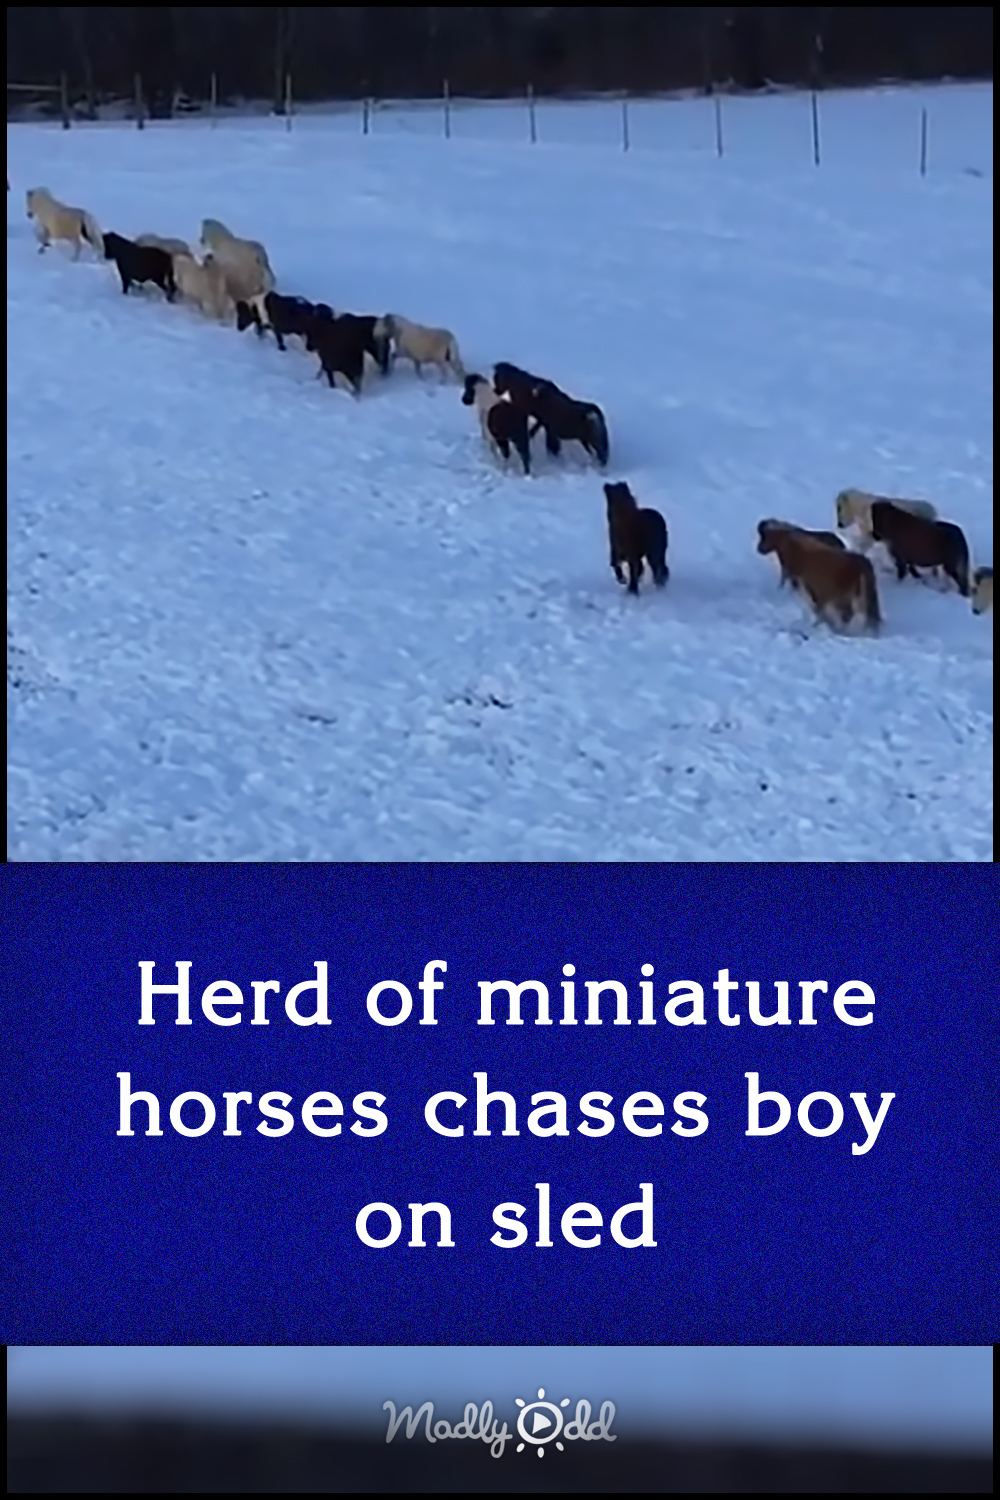 Herd of miniature horses chases boy on sled